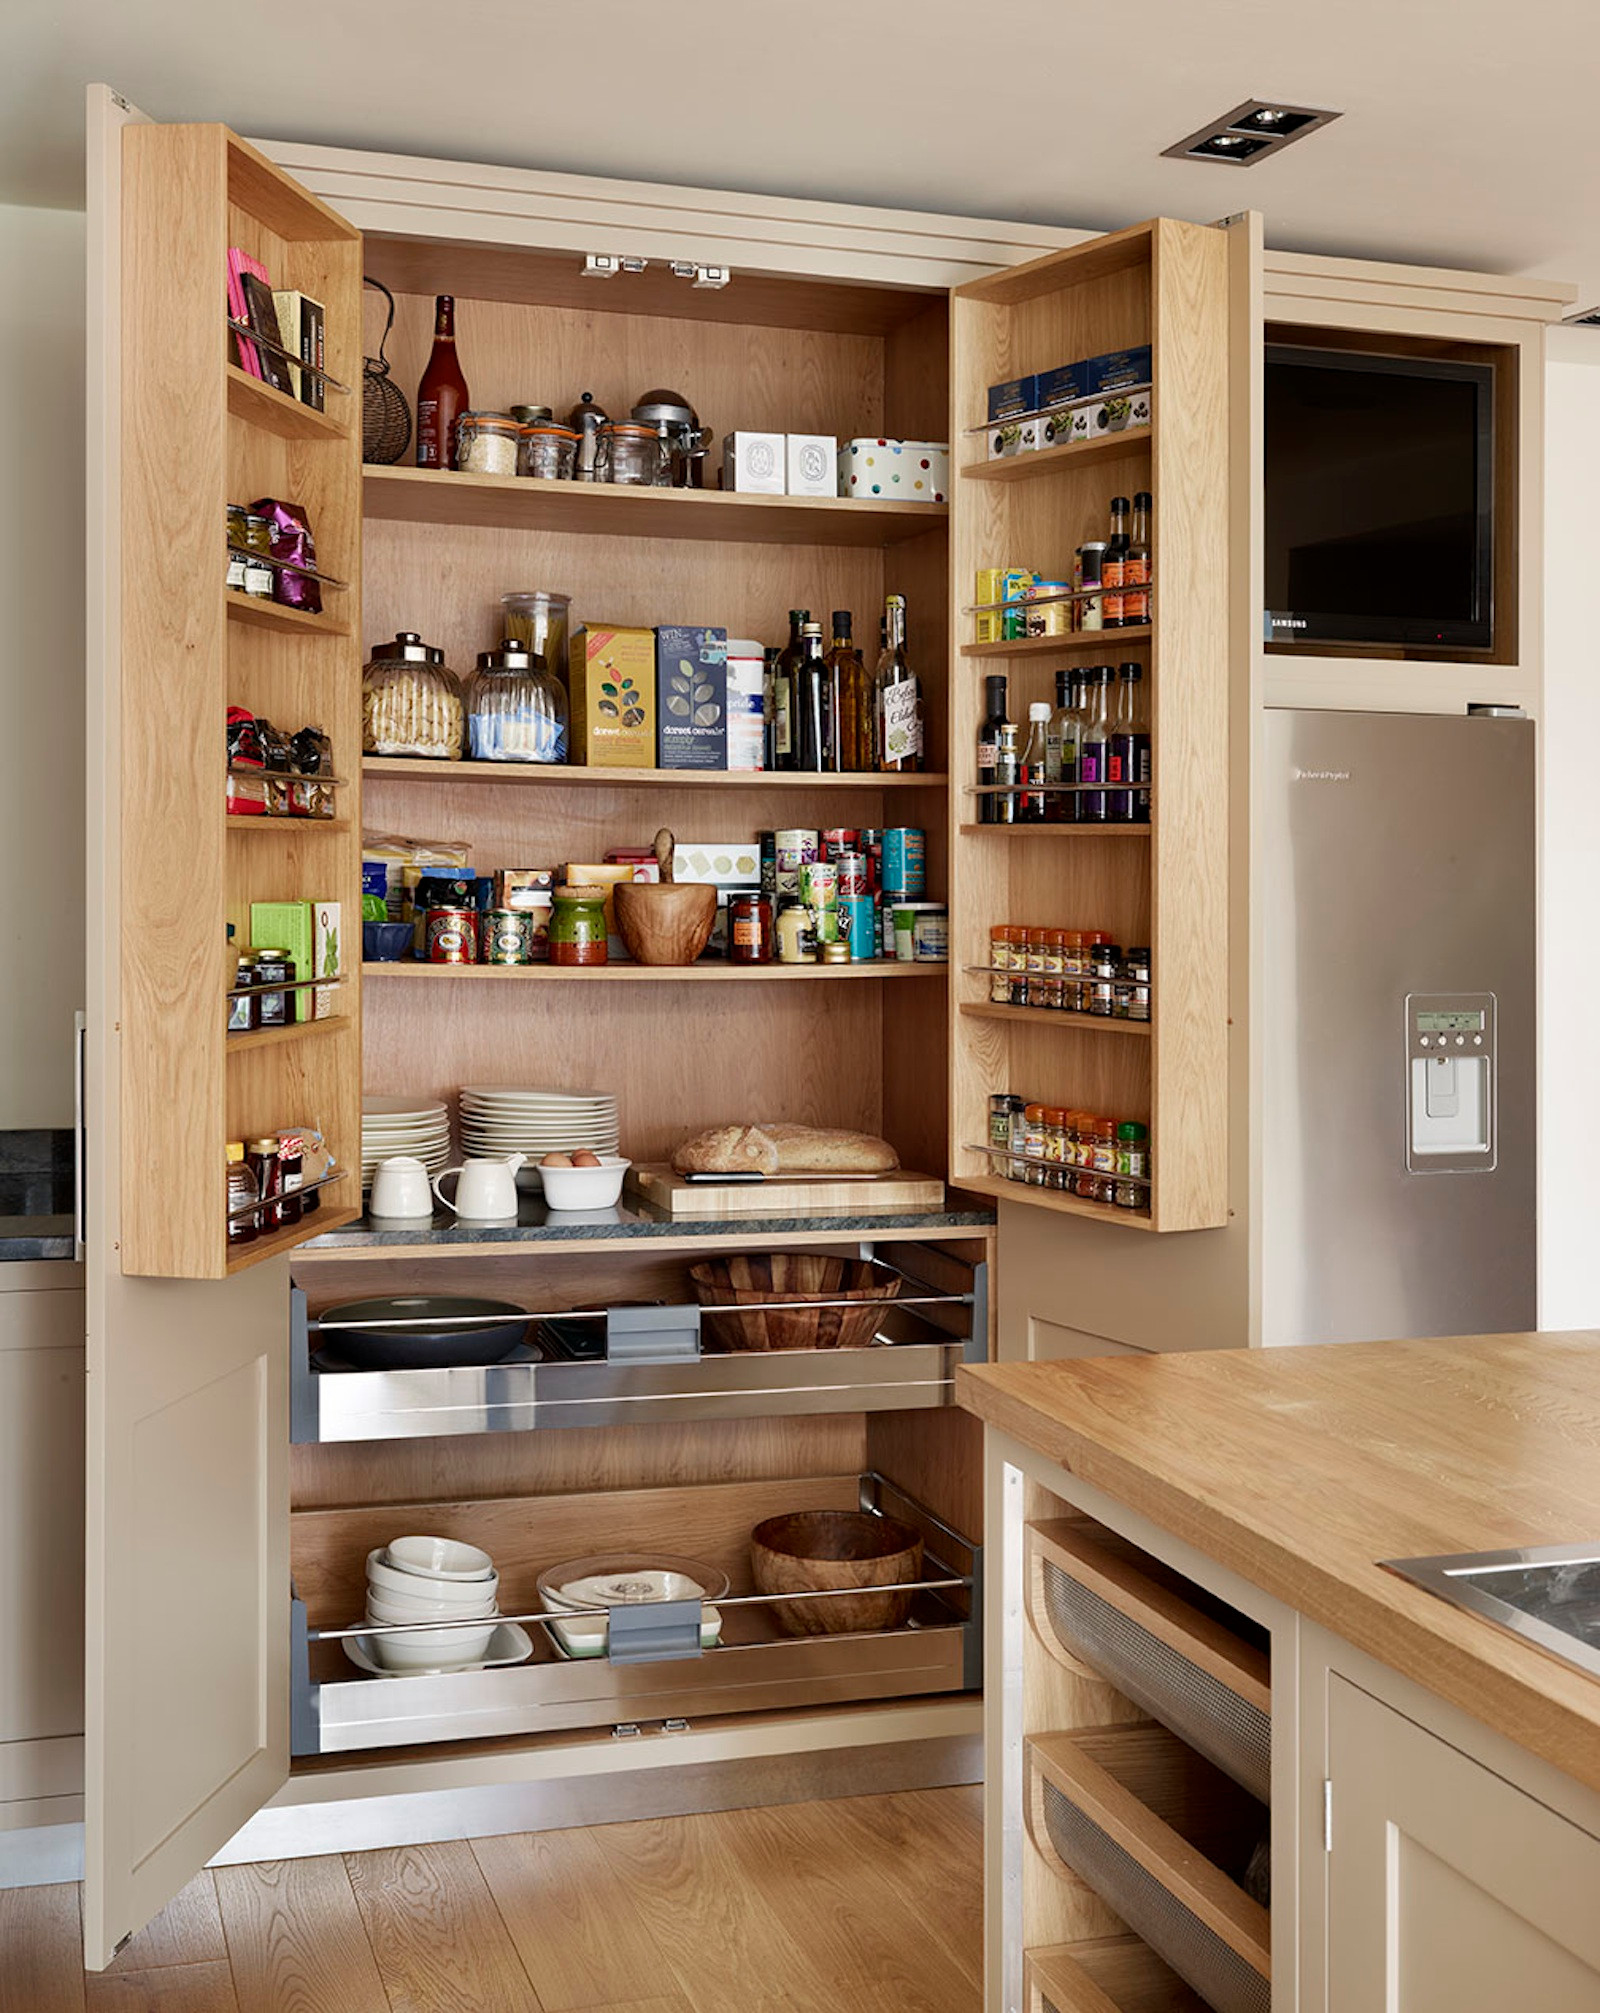 Kitchen Pantry Design Ideas For Your Home